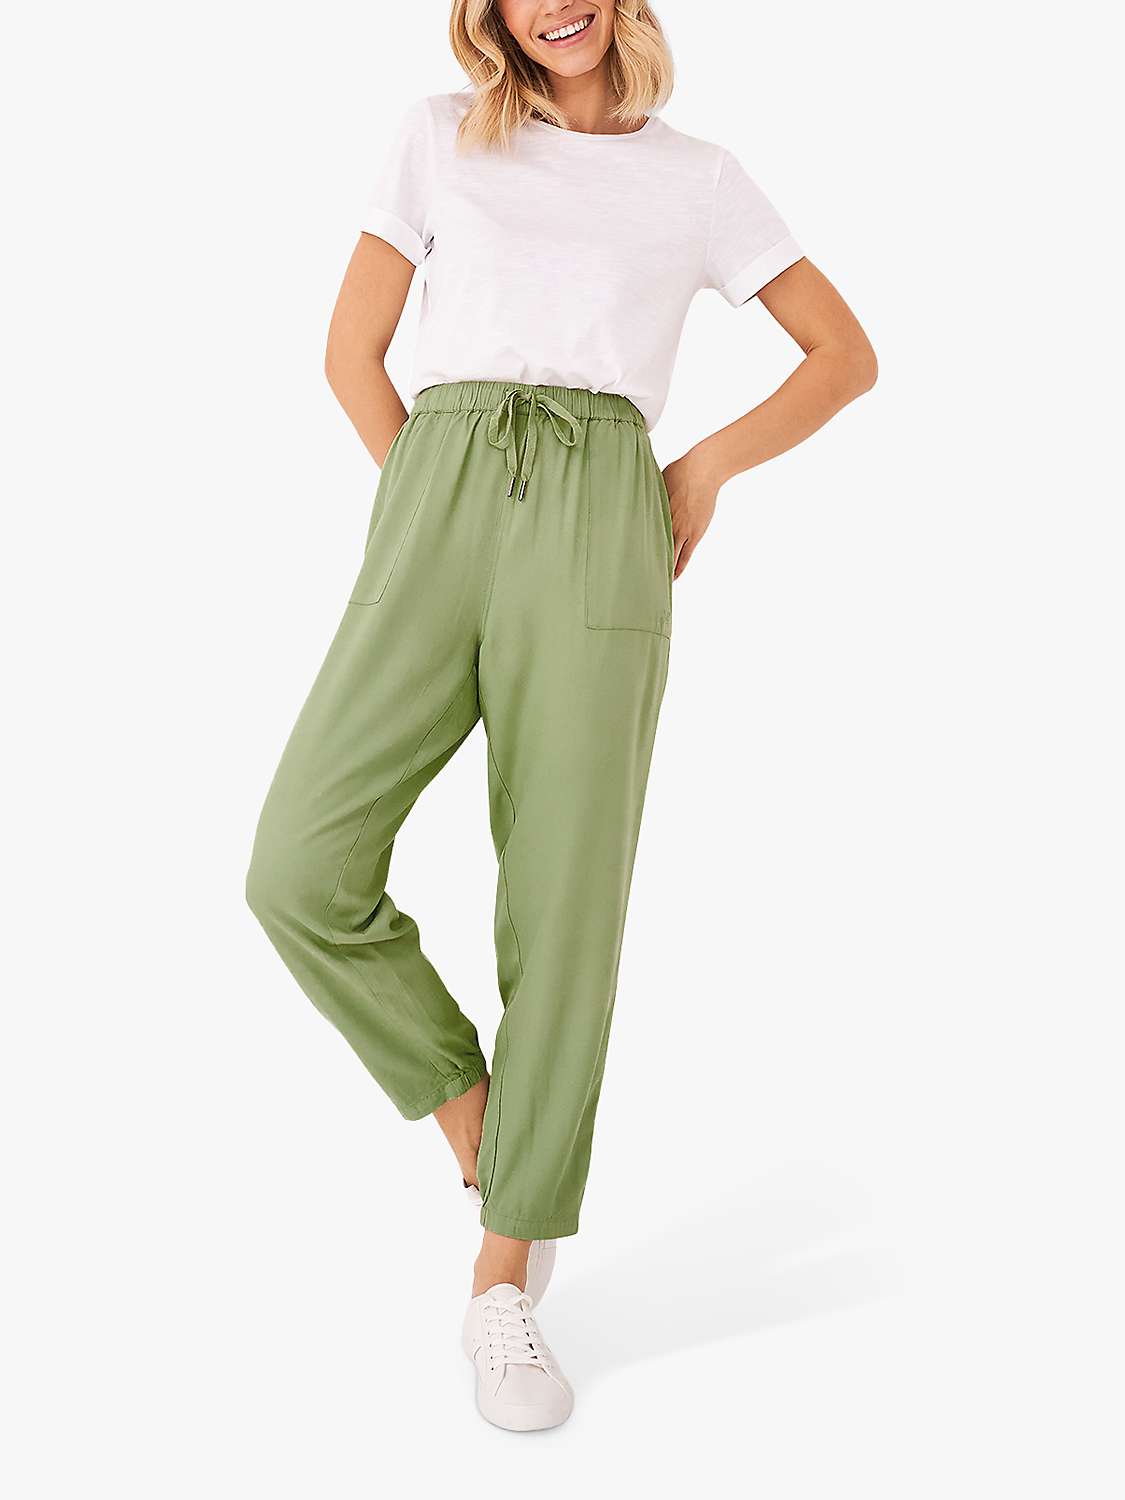 Buy Crew Clothing Relaxed Viscose Twill Trousers, Light Green Online at johnlewis.com